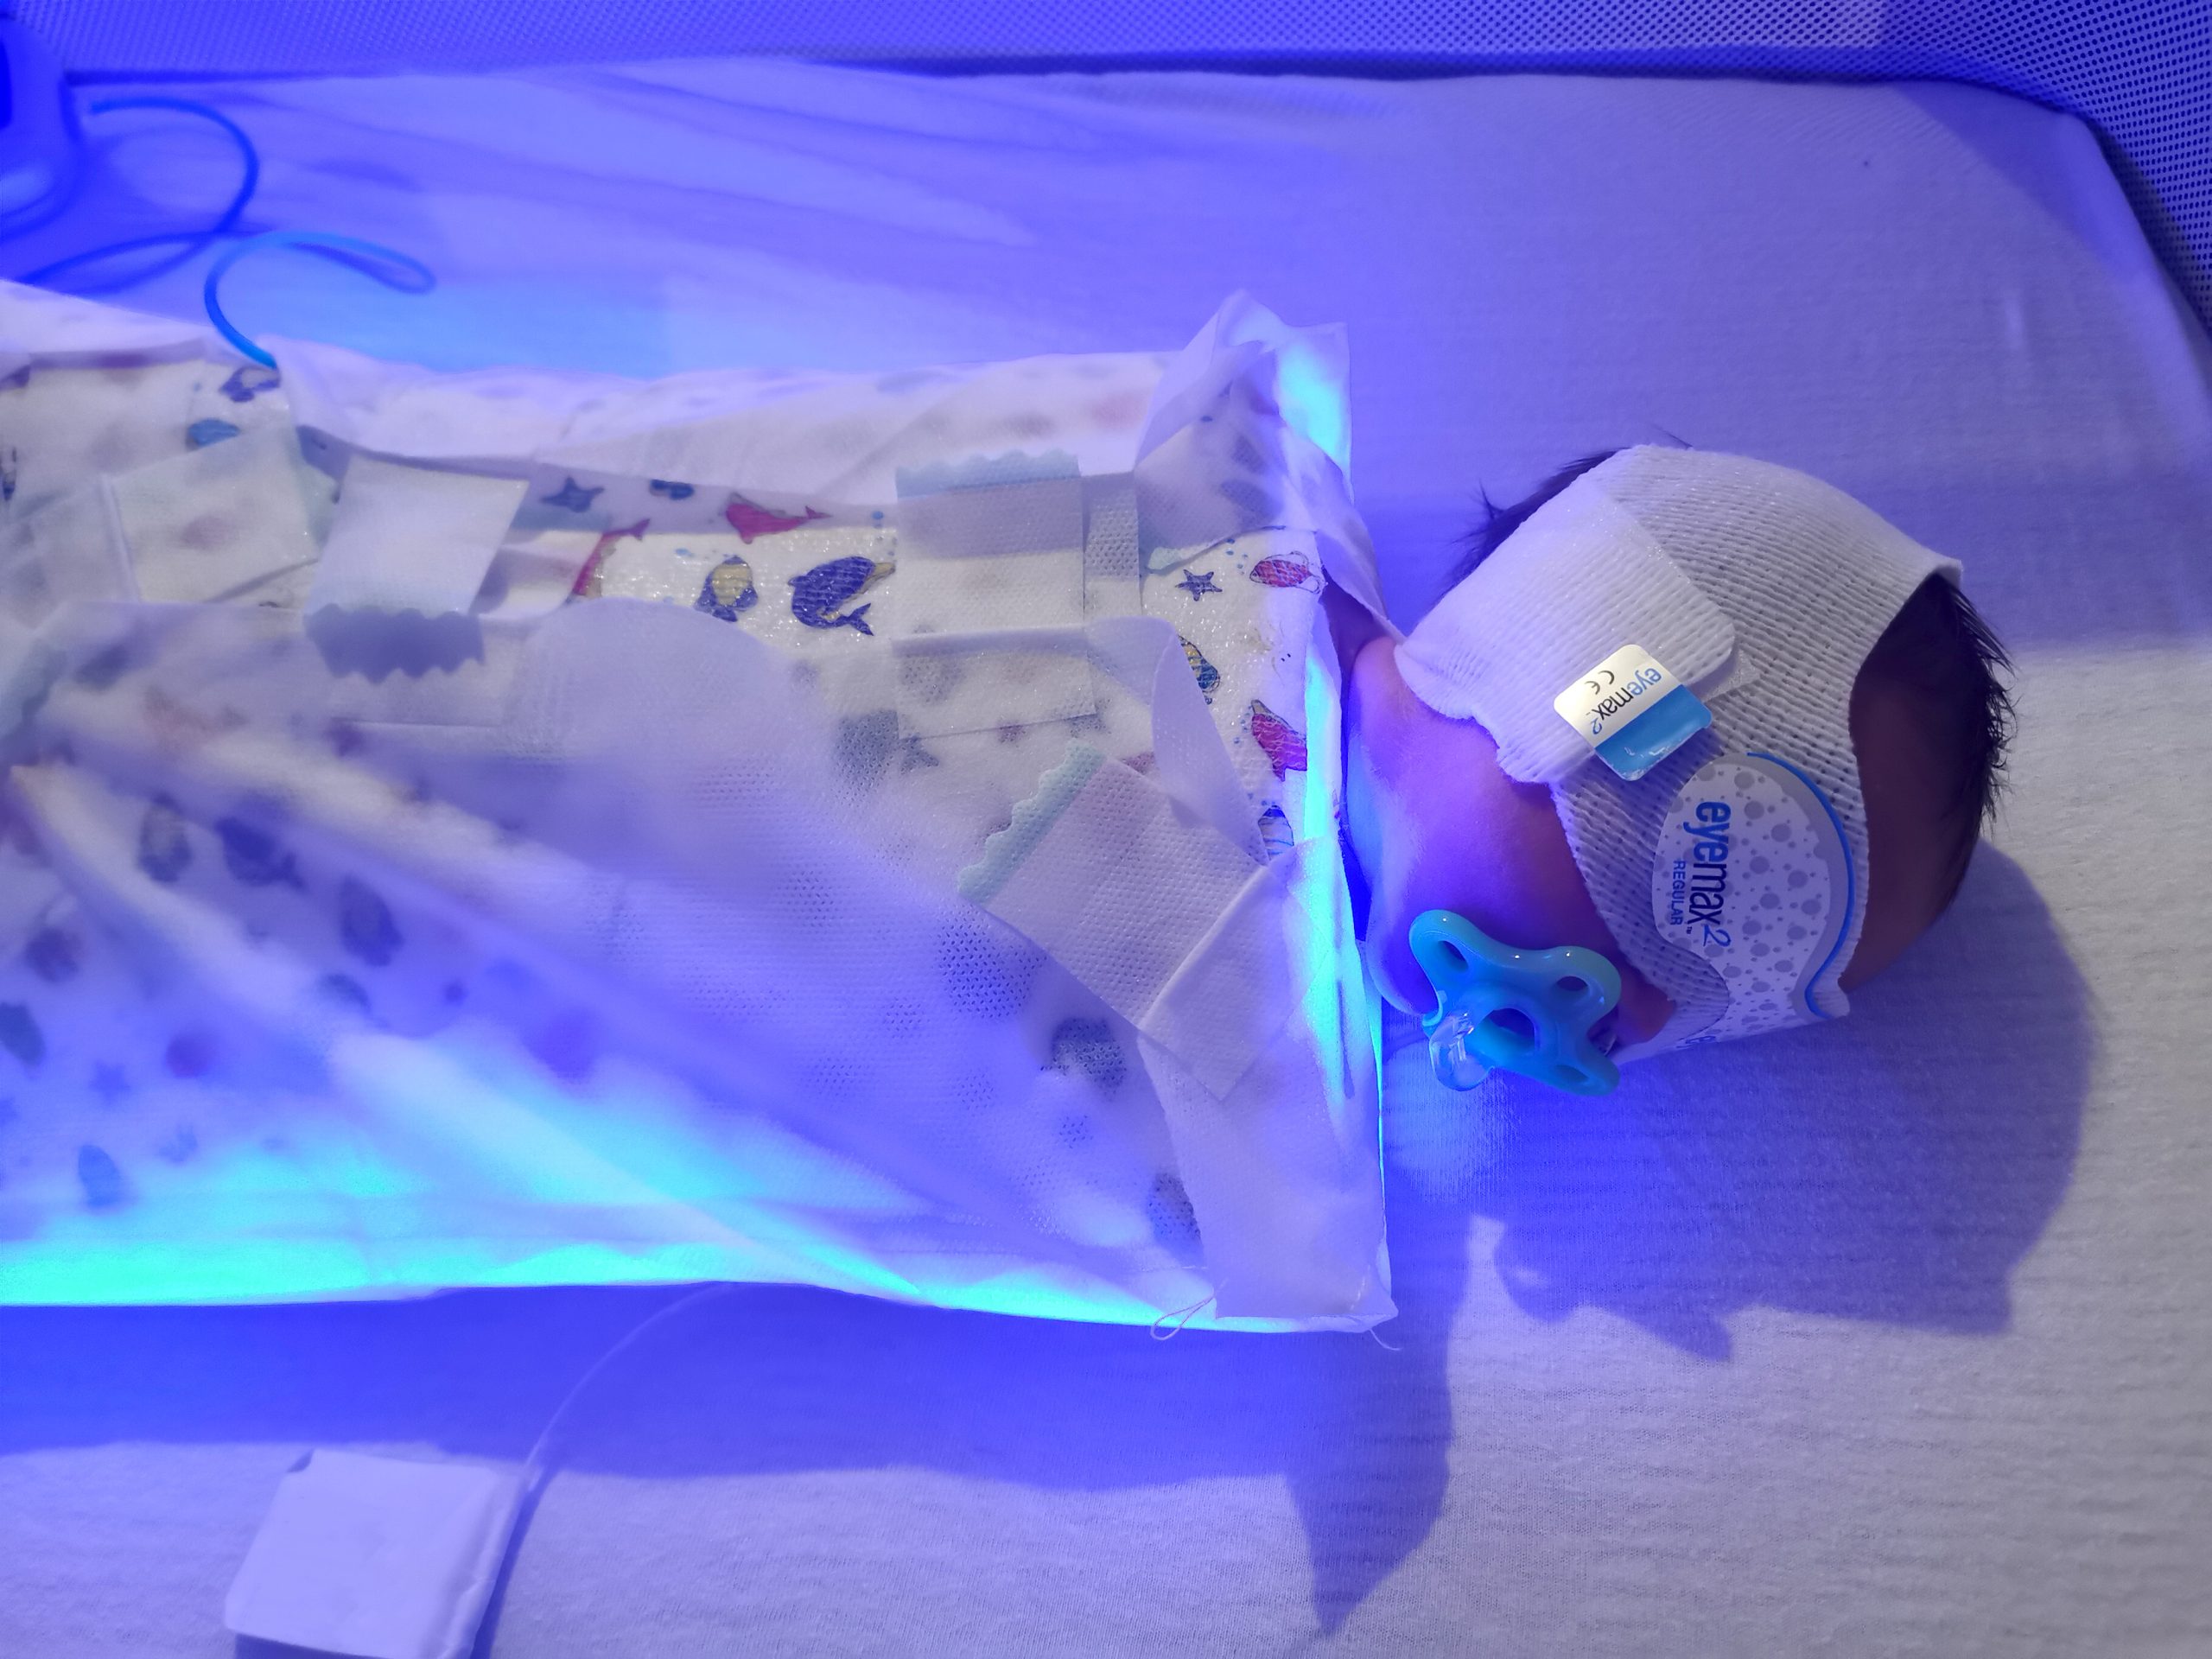 NEWS | A special cocoon which bathes babies with jaundice in special light is helping parents care for their new-borns at home